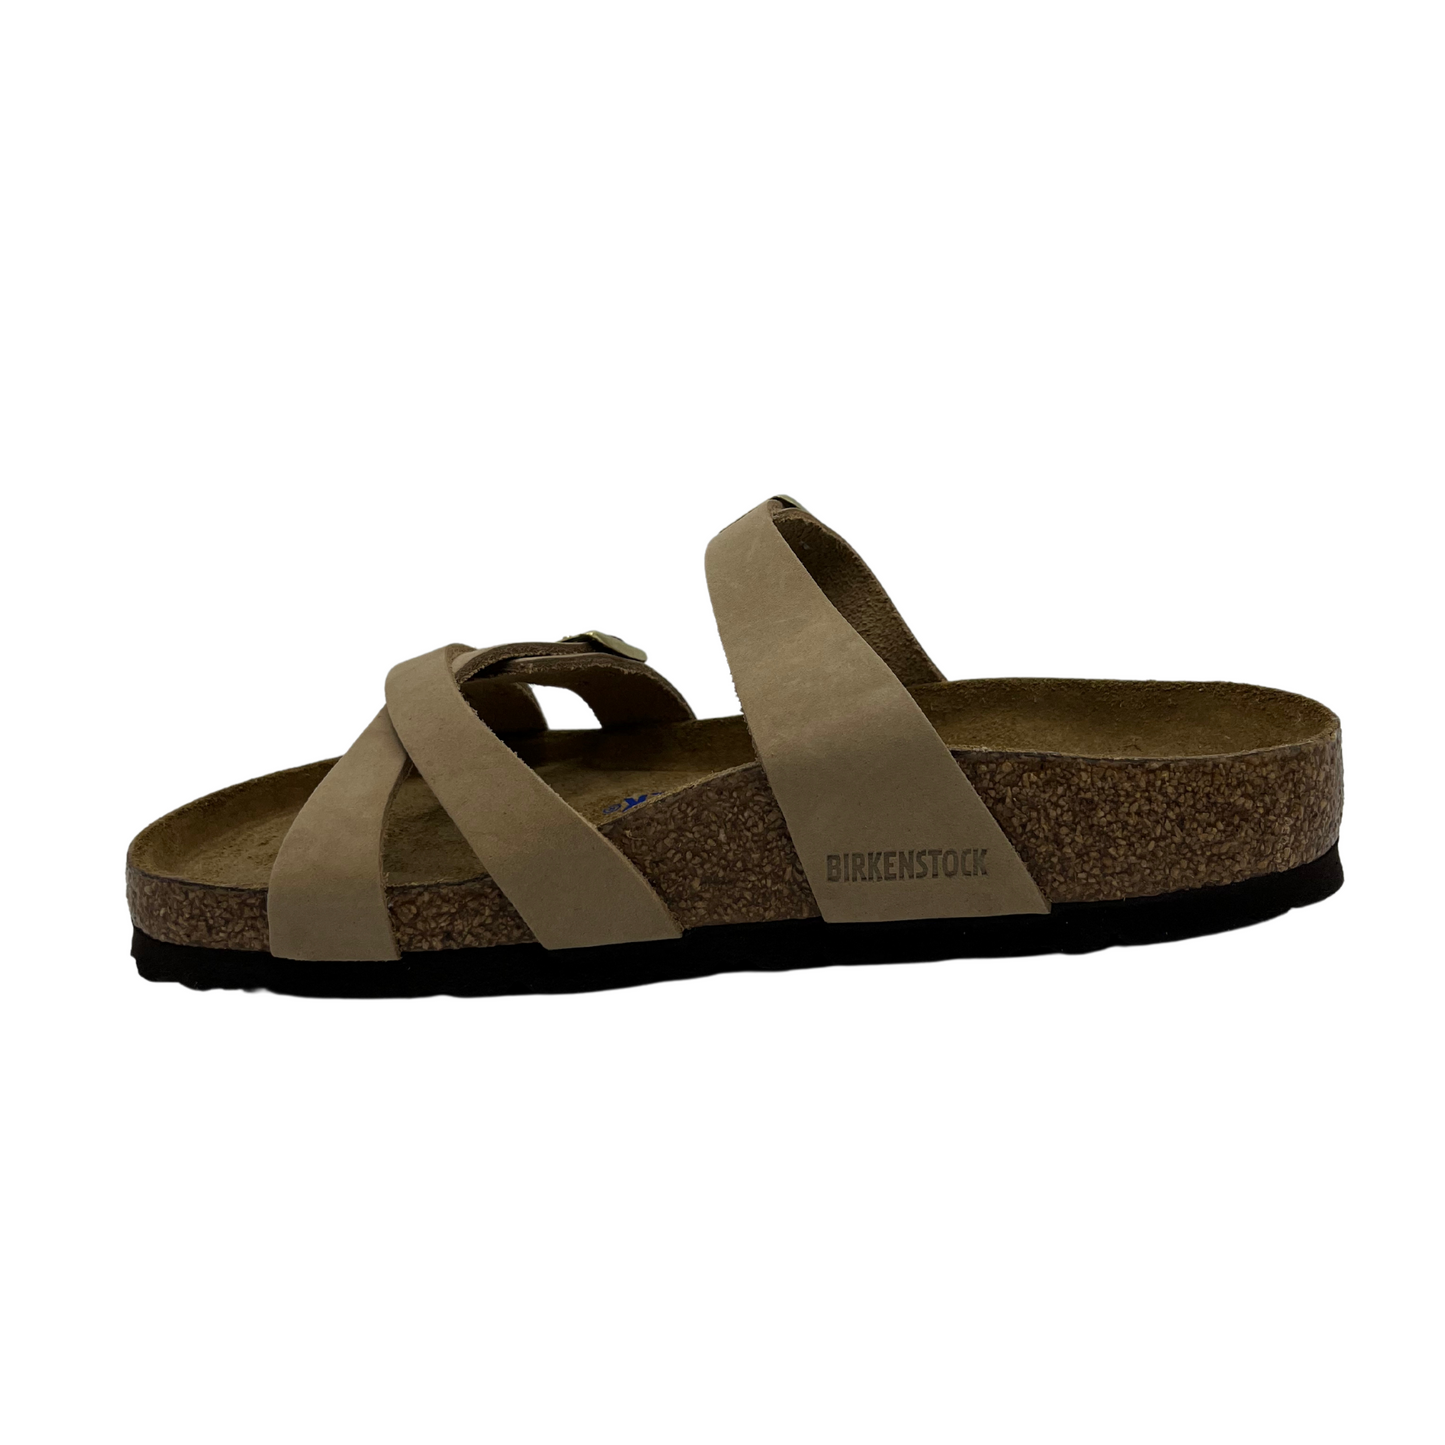 Left facing view of taupe strapped sandals with contoured footbed and three straps